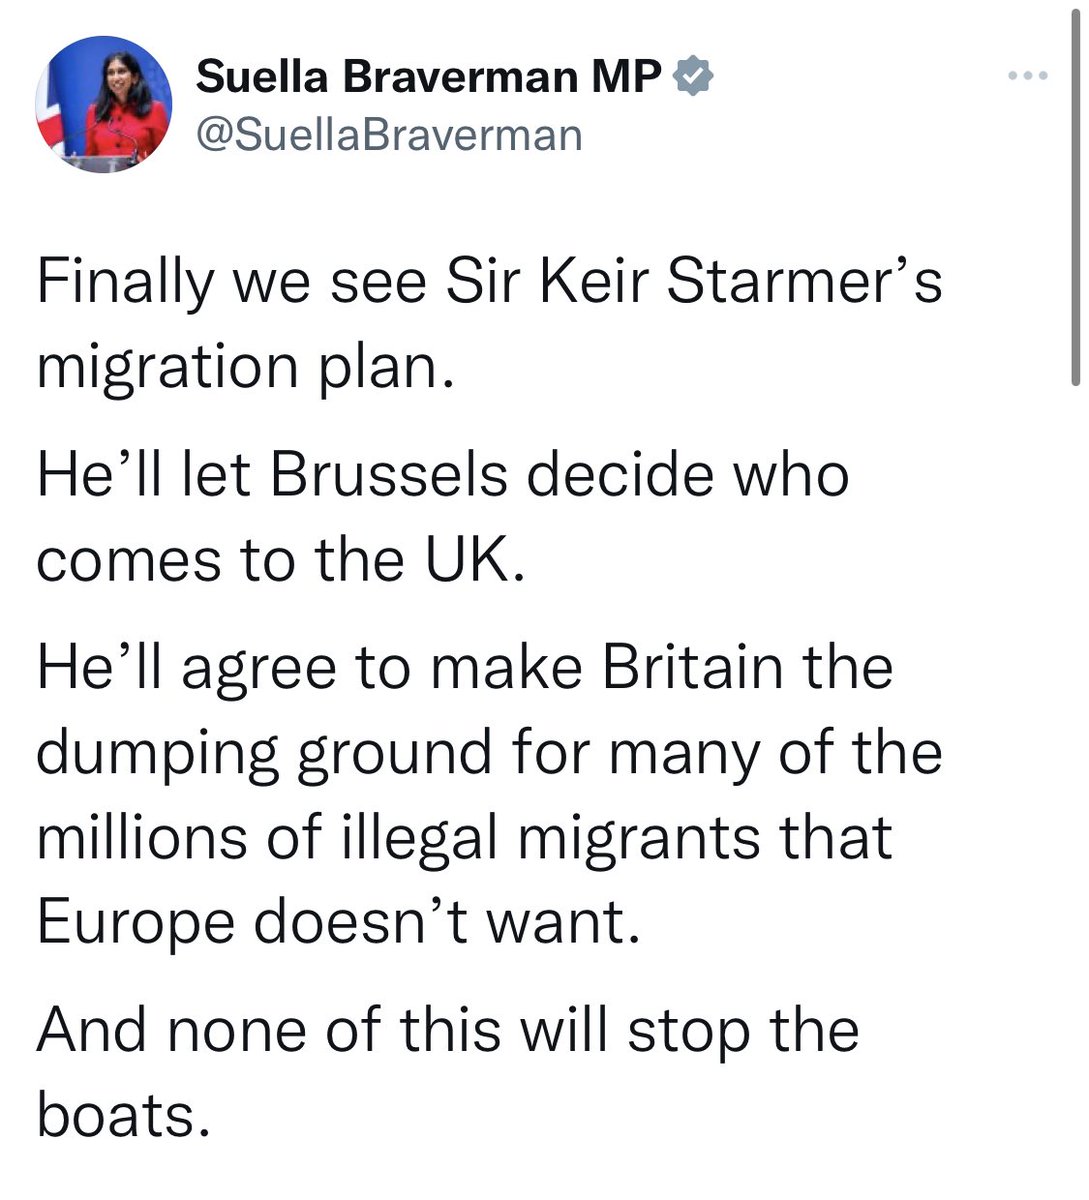 This is as obnoxious as it gets. The Home Secretary here outright lying about Starmer’s plan to start fixing the abhorrent mess she and the Tories have made of immigration and asylum. And not just lying, but snarling, vilifying, dog-whistling. Fascistic and foul.